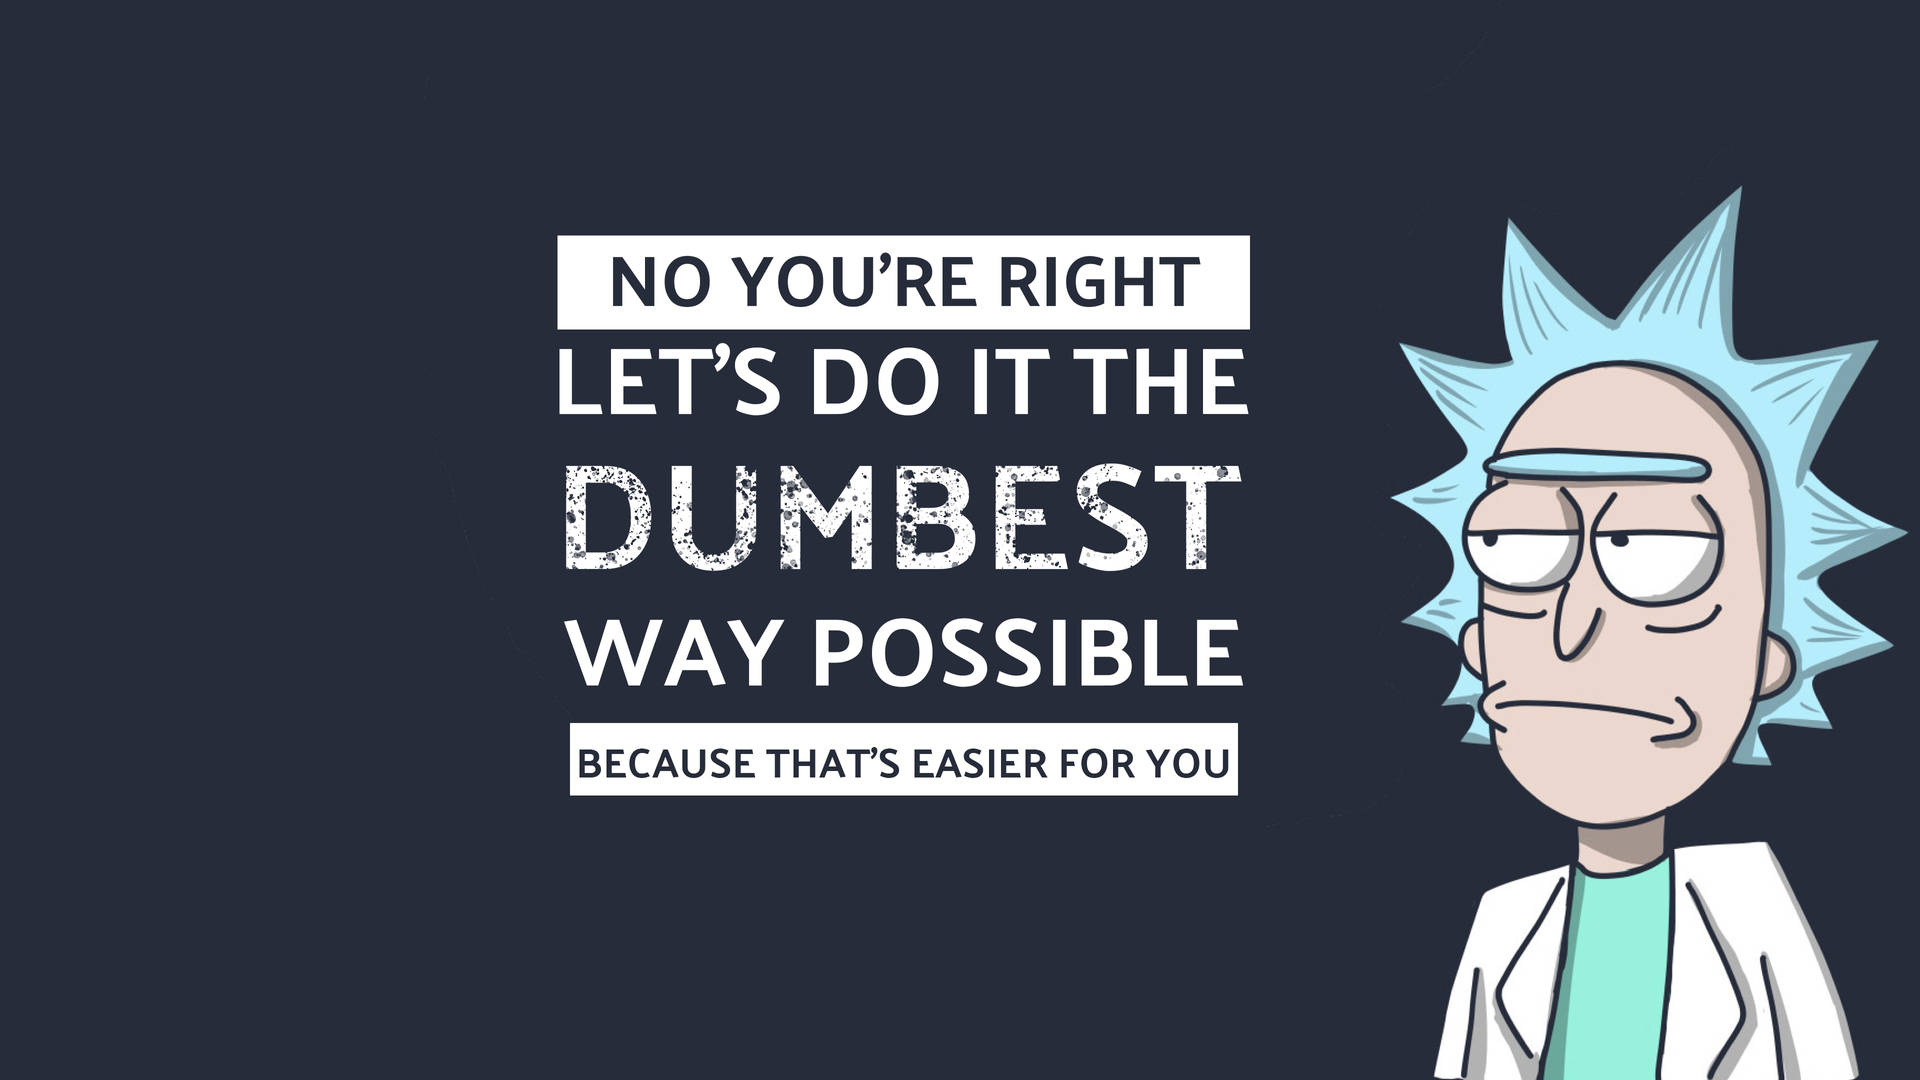 Have a cosmic day with Rick Sanchez Wallpaper